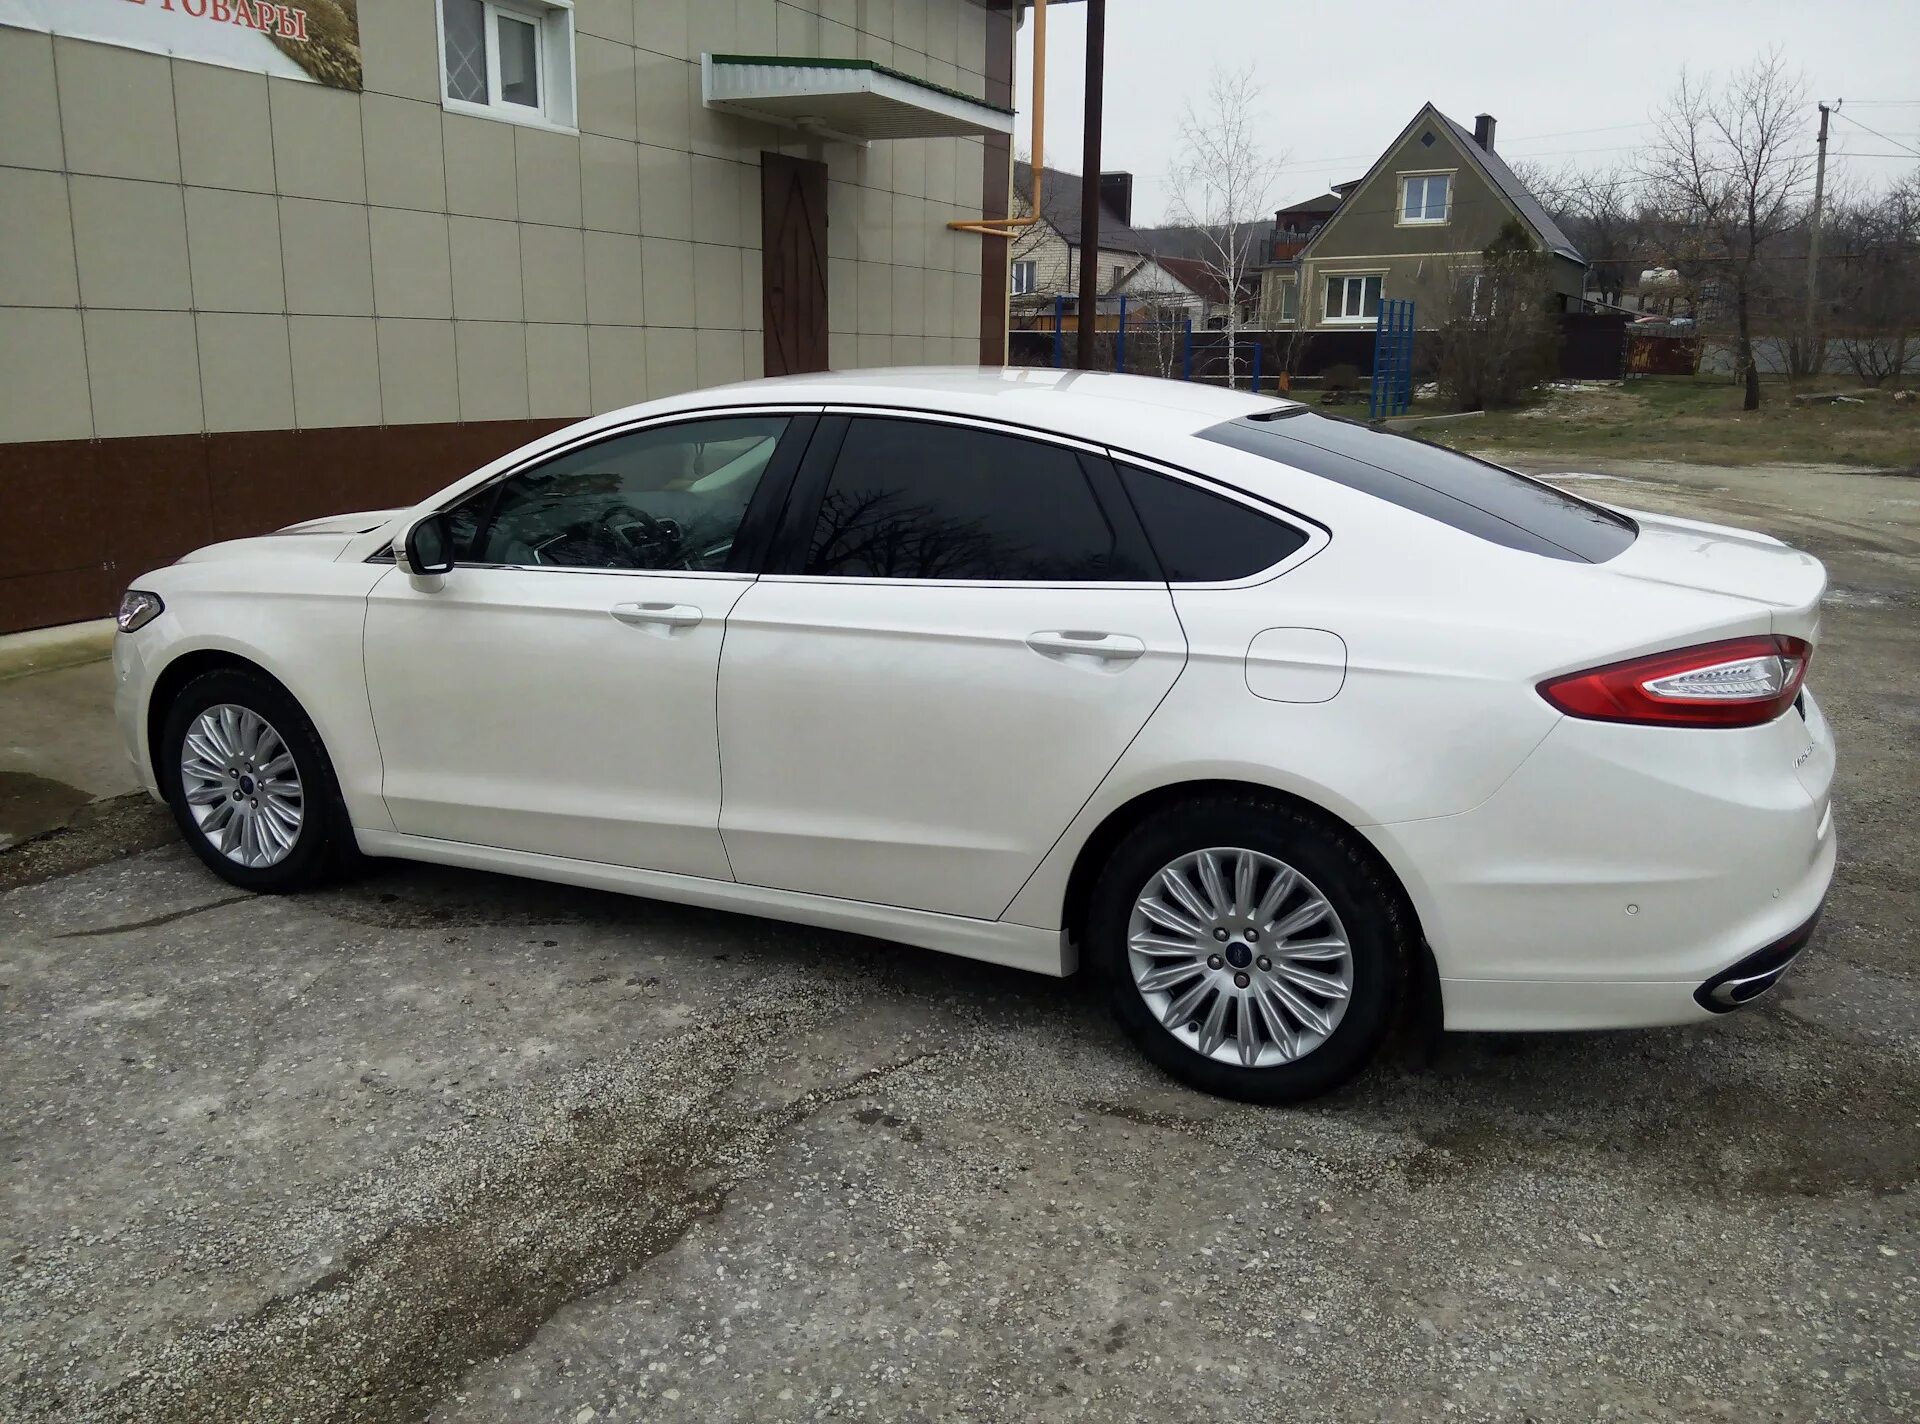 Ford Mondeo r17 белый. Ford Mondeo 5 r18. Ford Mondeo 5 r19. Форд Мондео 5 белый.